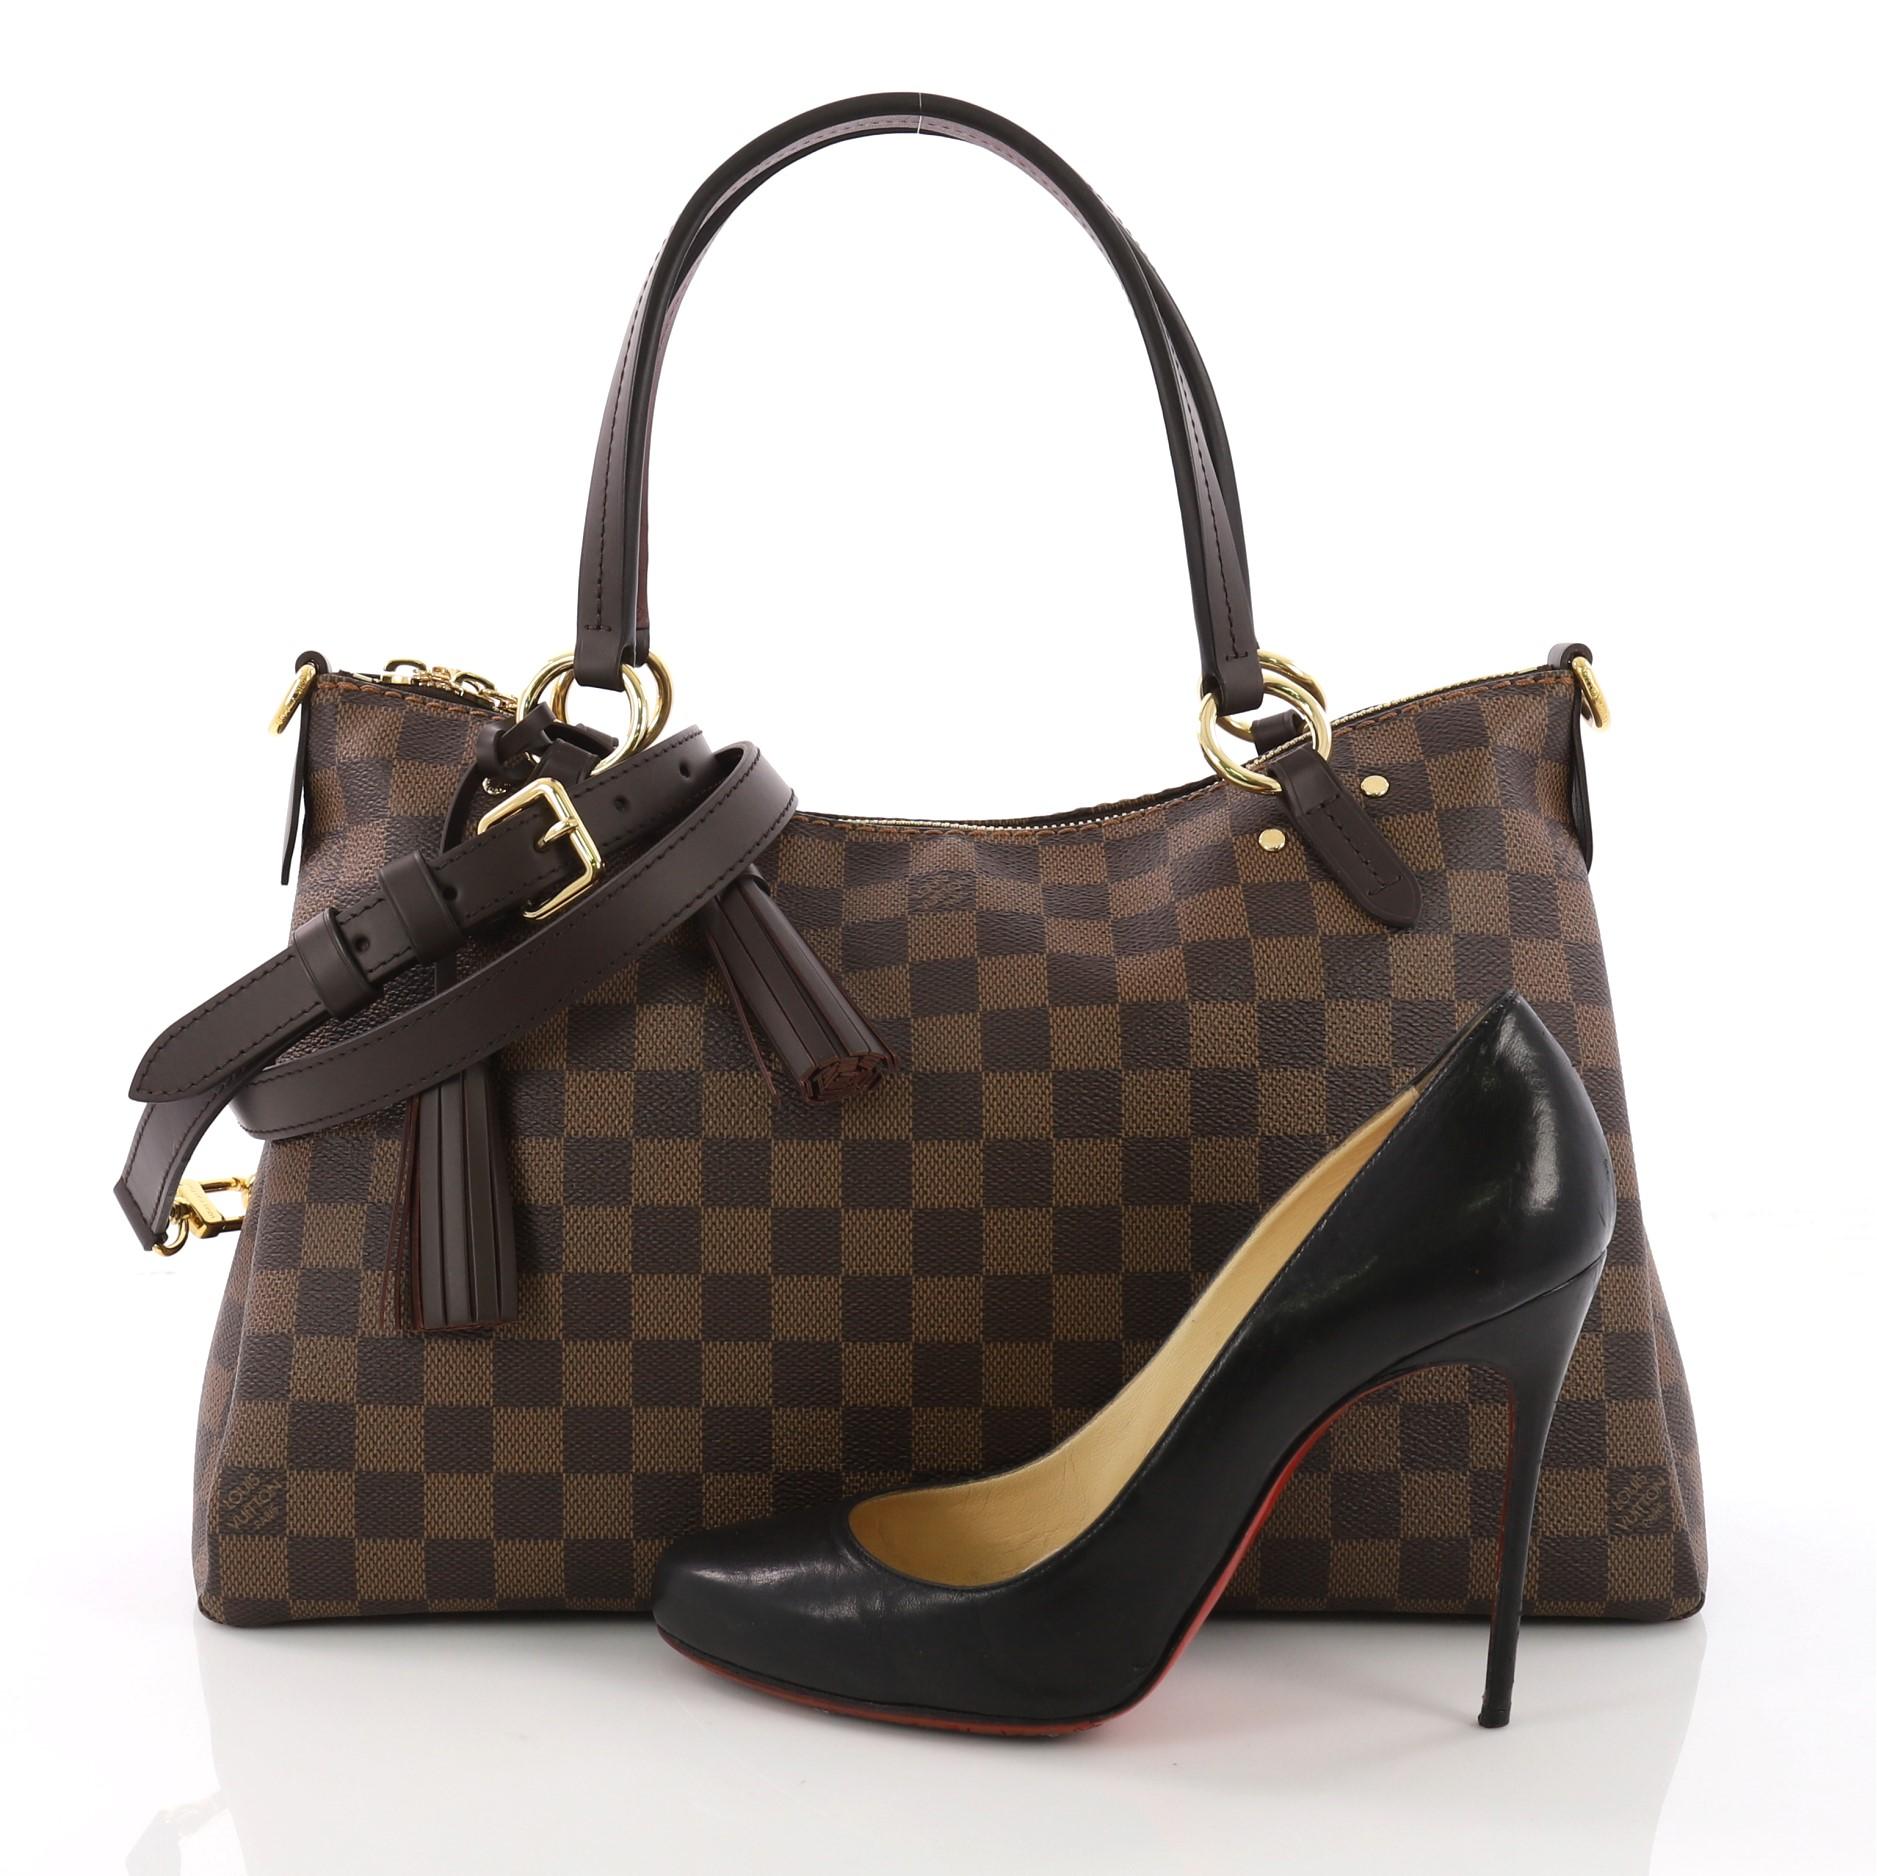 This Louis Vuitton Lymington Handbag Damier, crafted from damier ebene coated canvas, features dual flat handles, tassels, and gold-tone hardware. Its zip closure opens to a brown fabric interior with slip pocket. Authenticity code reads: CA0158.